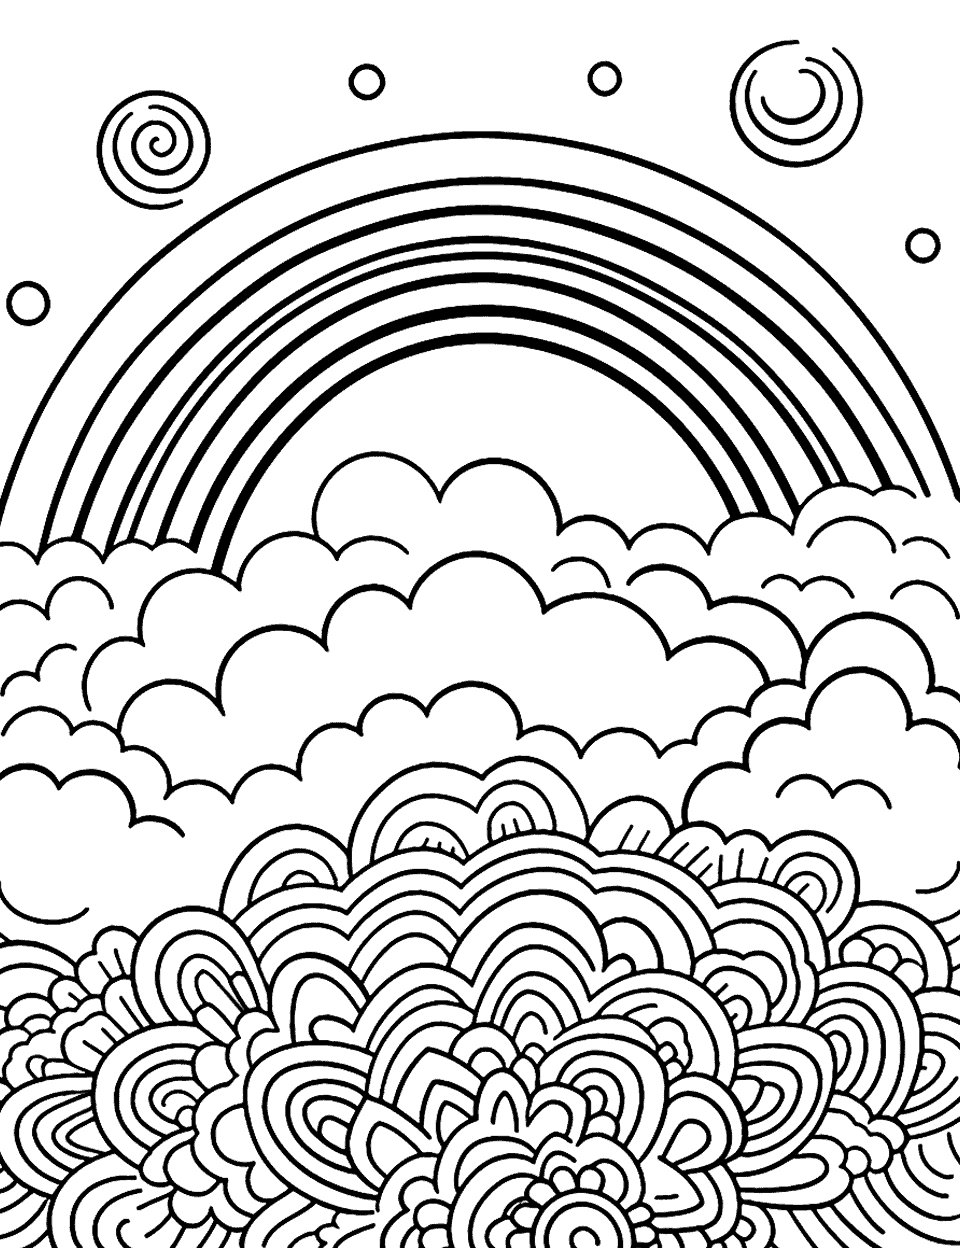 Mandala Inspired Rainbow Coloring Page - A detailed mandala with rainbow elements suitable for older kids.